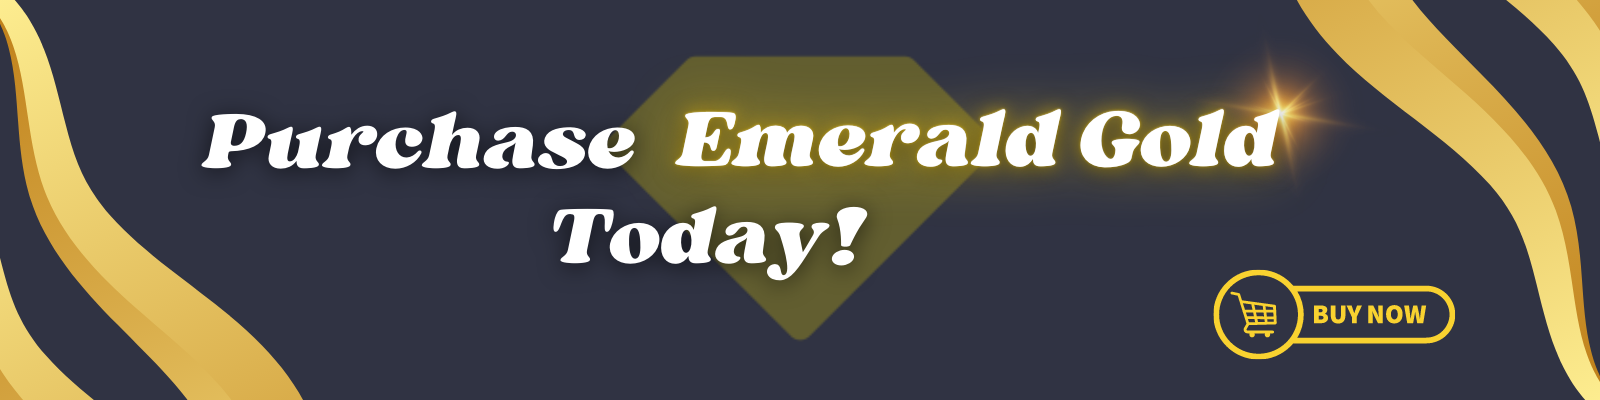 Purchase Emerald Gold Today